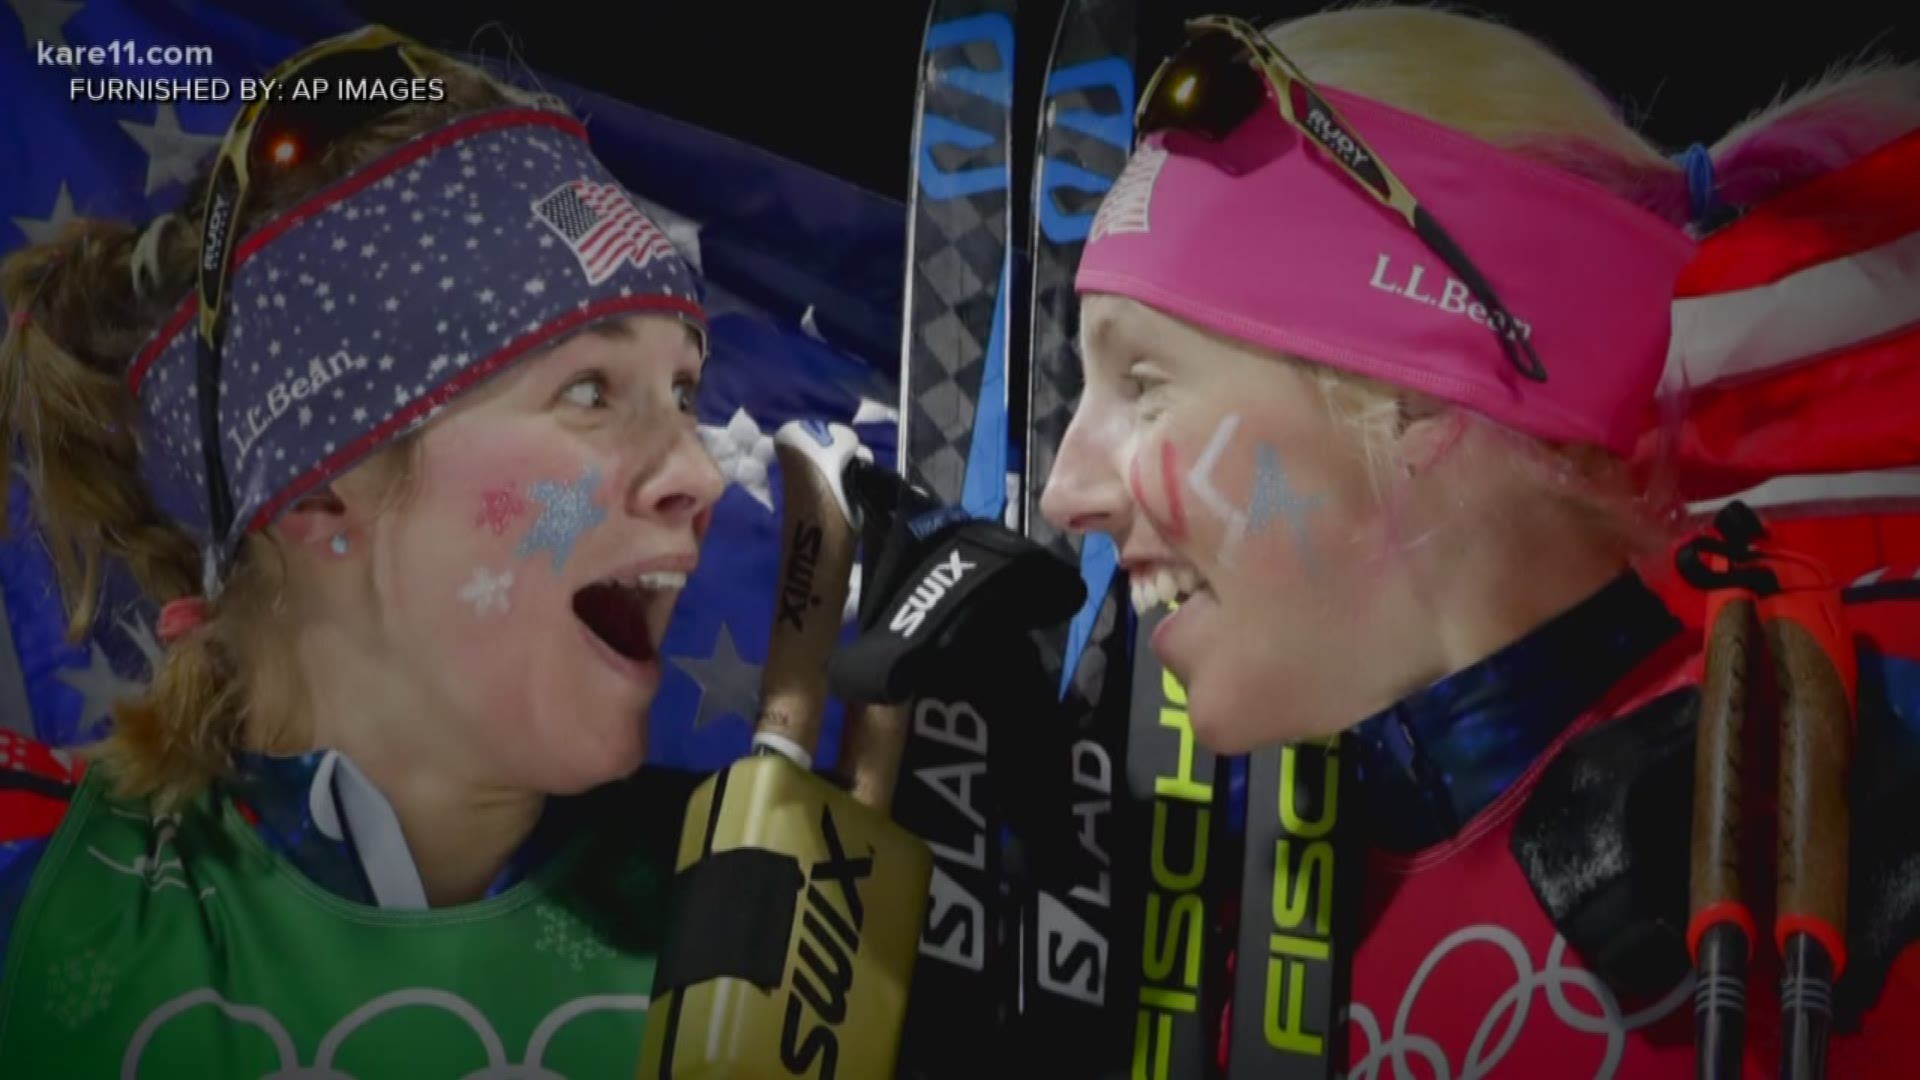 A year ago today, Kikkan Randall made Team USA history with Jessie Diggins. Now, she's fighting a new battle against breast cancer - while encouraging young athletes to reach for the stars. https://kare11.tv/2NmTAJr